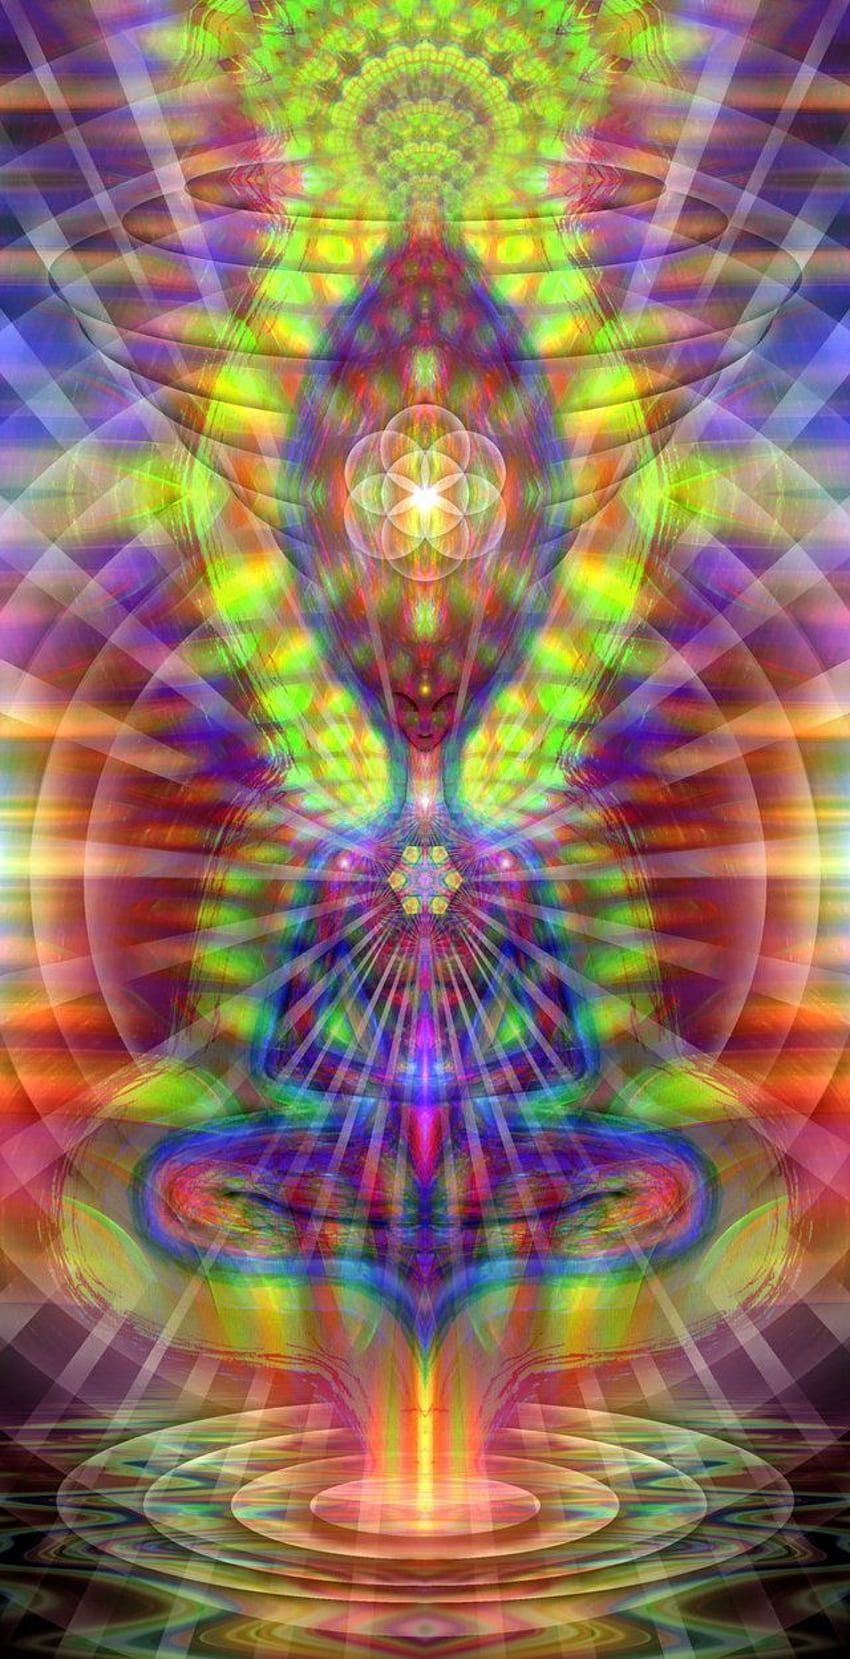 Premium Photo  Ayahuasca experience holistic healing spiritual insight  psychedelic vision 3d illustration